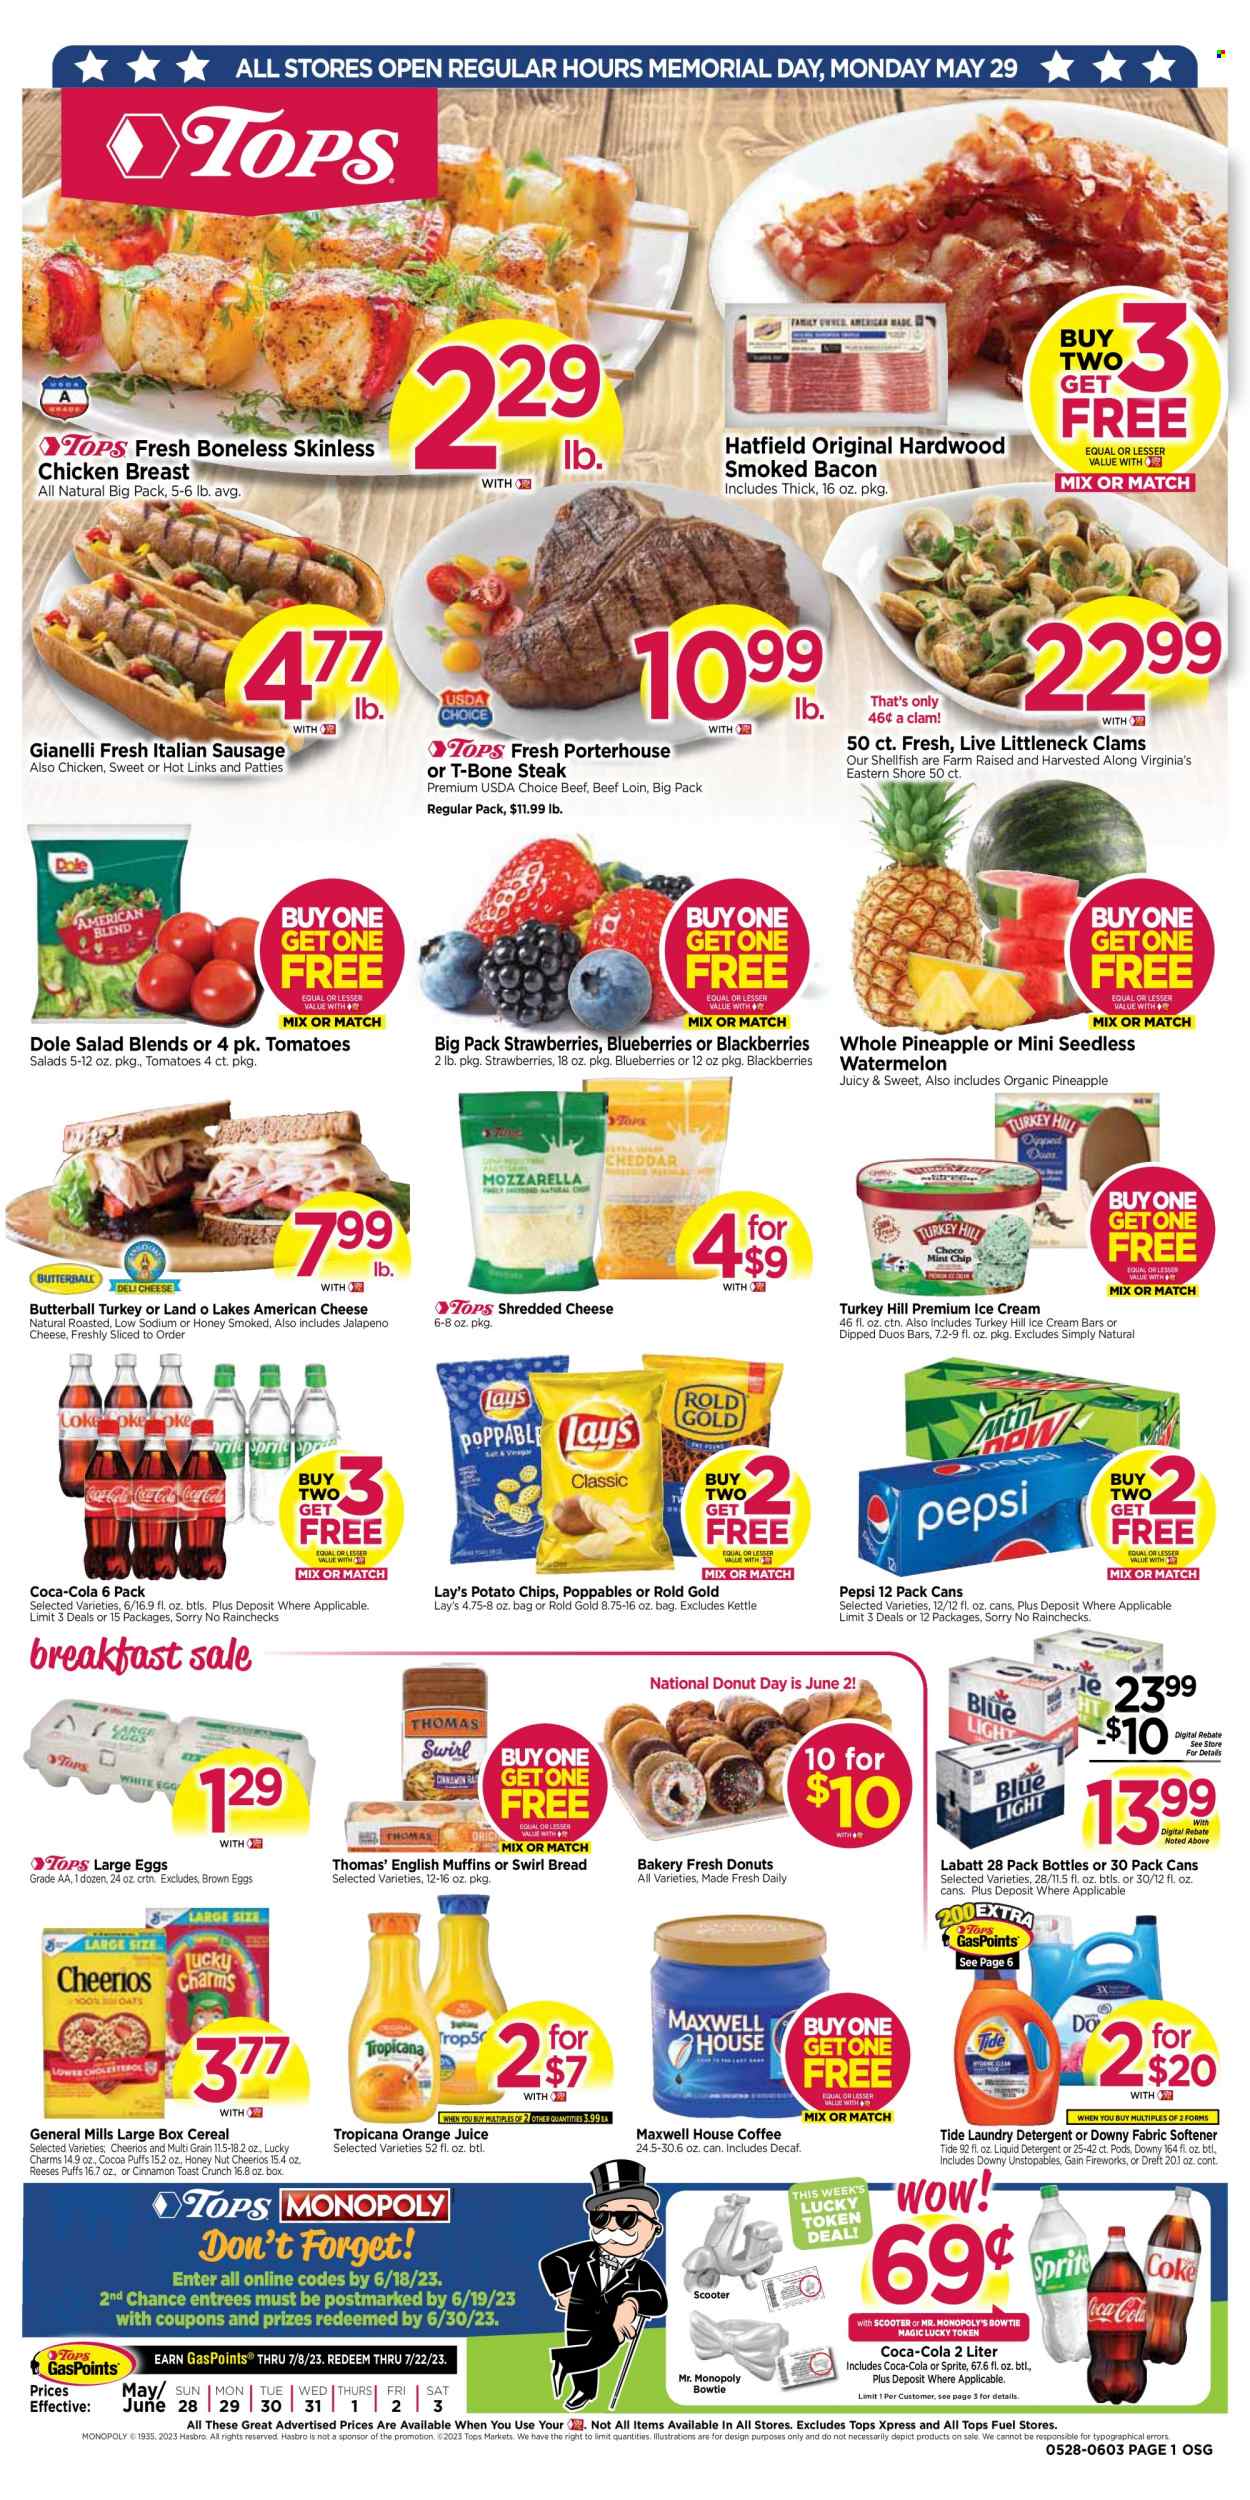 thumbnail - Tops Flyer - 05/28/2023 - 06/03/2023 - Sales products - bread, english muffins, puffs, donut, salad, Dole, jalapeño, blackberries, blueberries, watermelon, clams, Butterball, sausage, italian sausage, american cheese, shredded cheese, large eggs, ice cream, ice cream bars, Reese's, General Mills, potato chips, chips, Lay’s, cereals, Cheerios, cinnamon, Coca-Cola, Sprite, Pepsi, orange juice, juice, soft drink, Maxwell House, chicken breasts, chicken, turkey, beef meat, t-bone steak, steak, detergent, Gain, Tide, Unstopables, fabric softener, liquid detergent, laundry detergent, Gain Fireworks, Downy Laundry. Page 1.